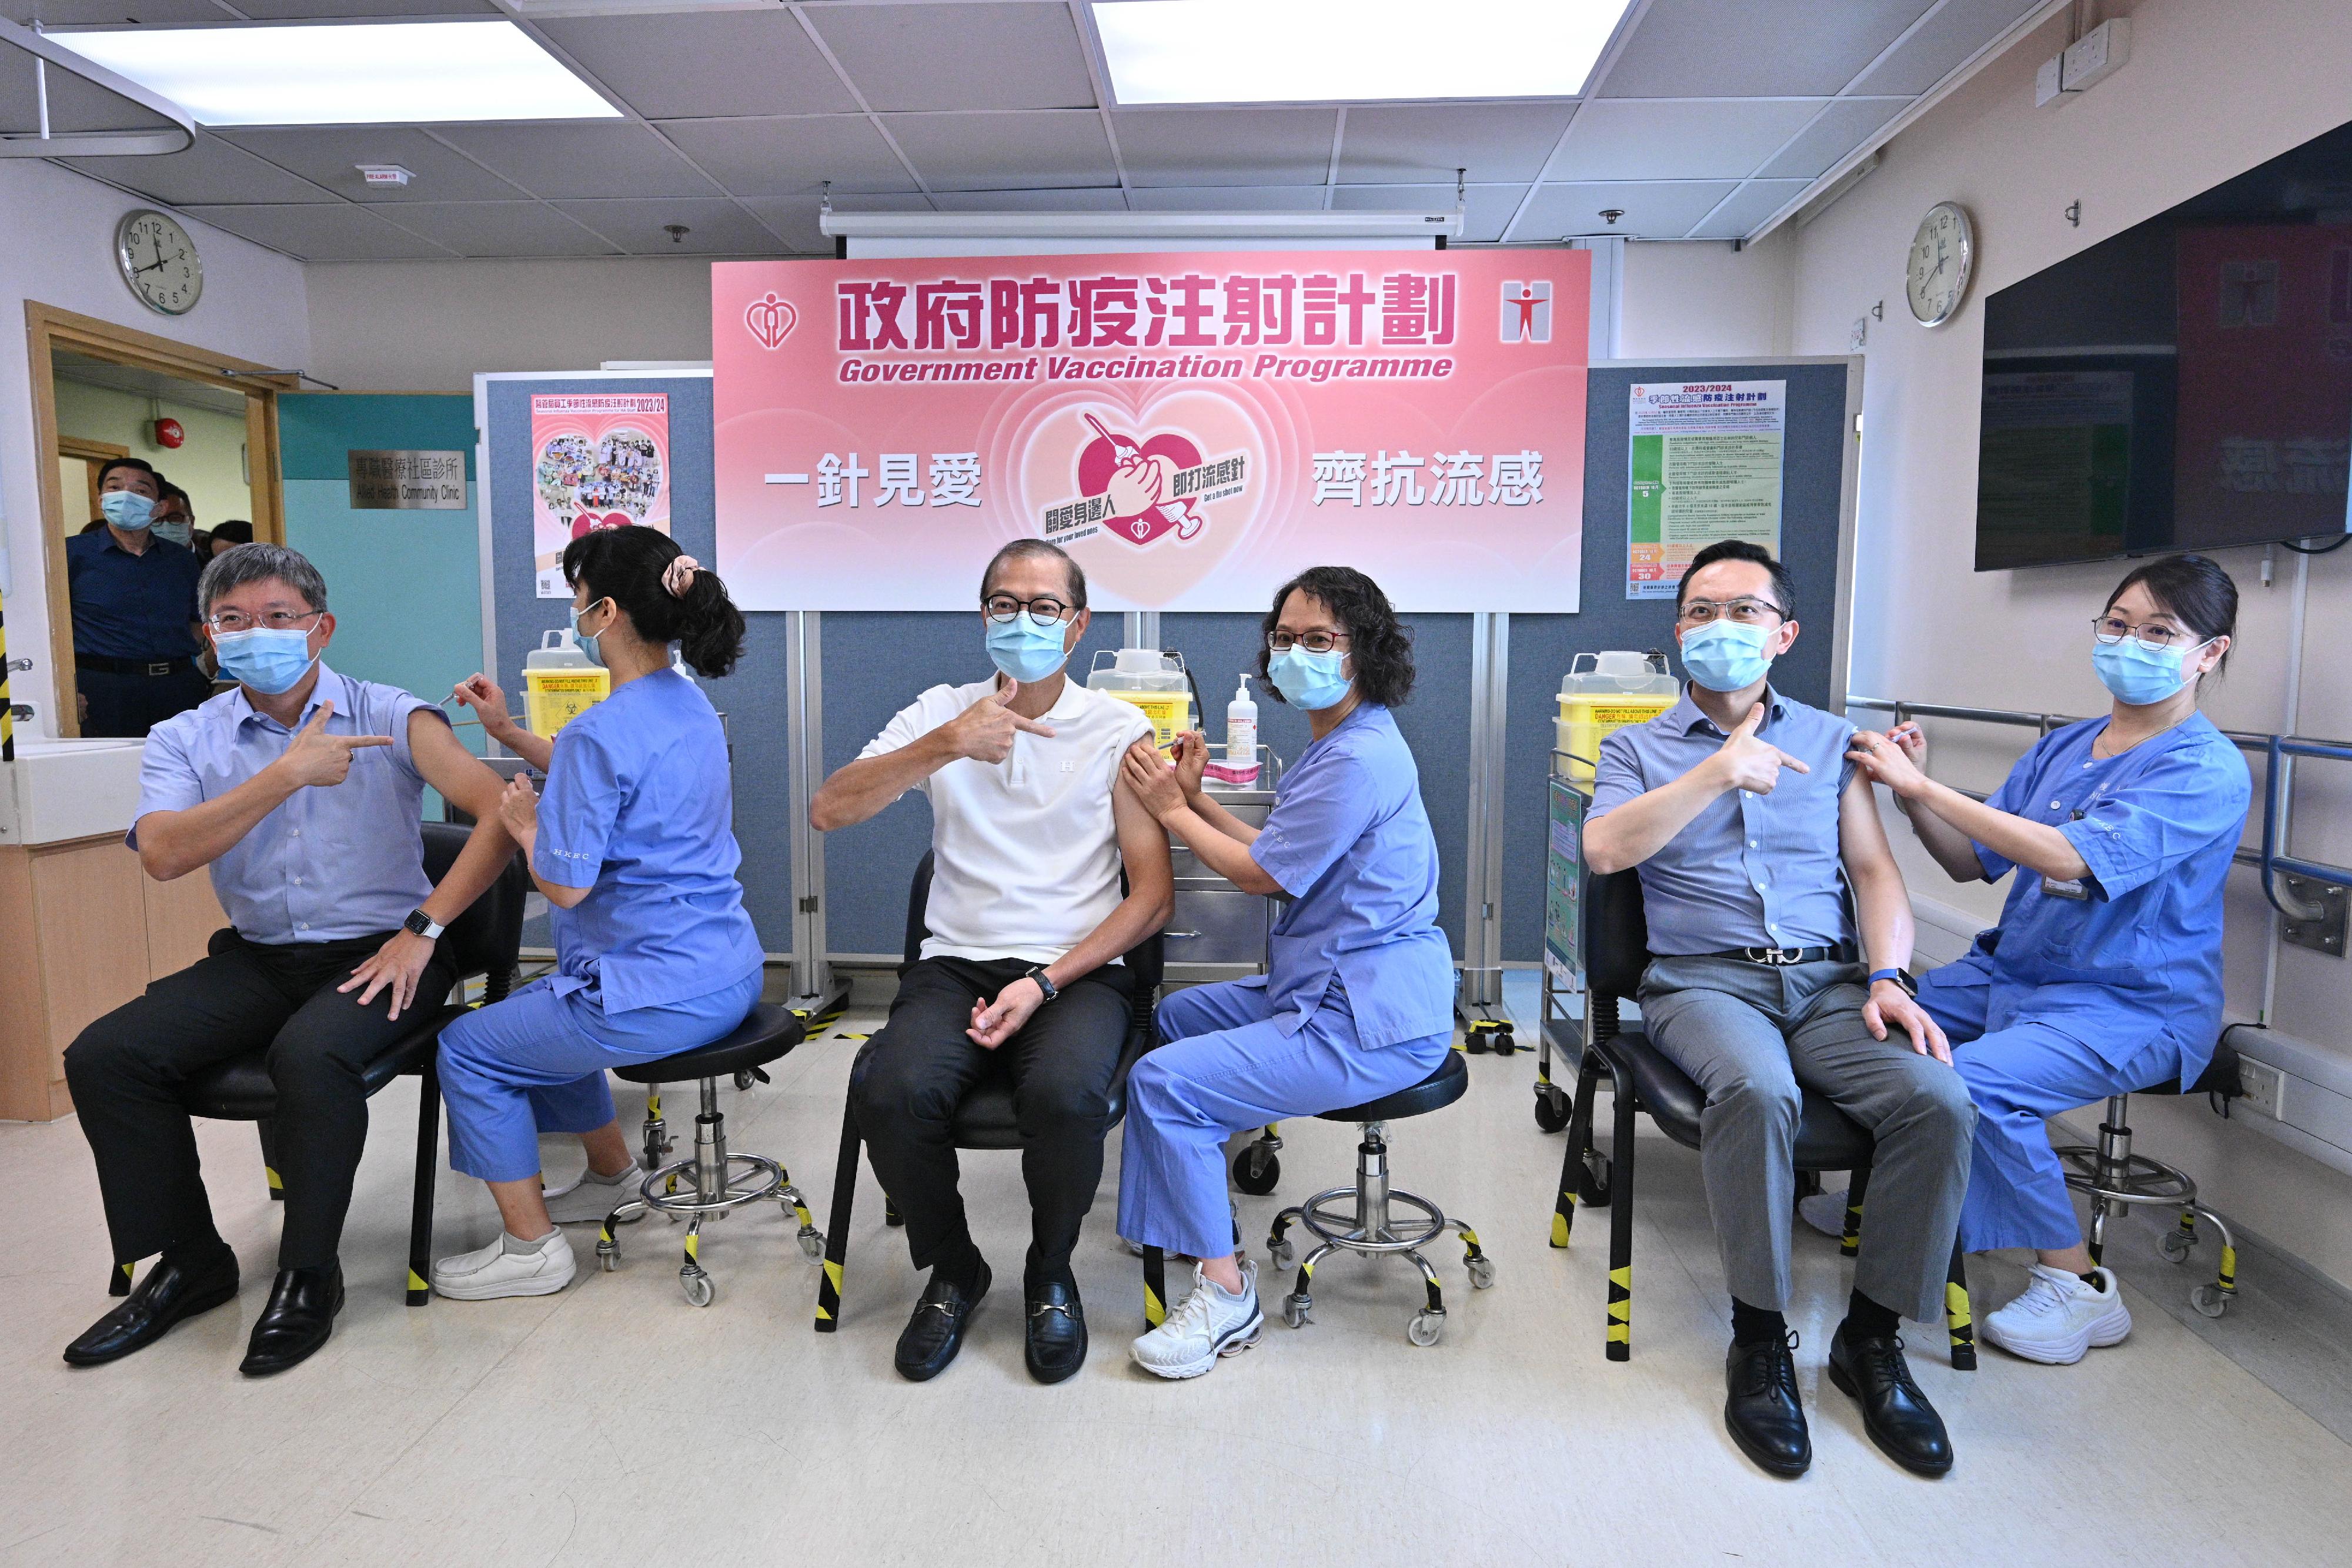 The Secretary for Health, Professor Lo Chung-mau (third left); the Permanent Secretary for Health, Mr Thomas Chan (first left); and the Director of Health, Dr Ronald Lam (second right), receive the seasonal influenza vaccination at the Sai Wan Ho General Out-patient Clinic today (September 28).